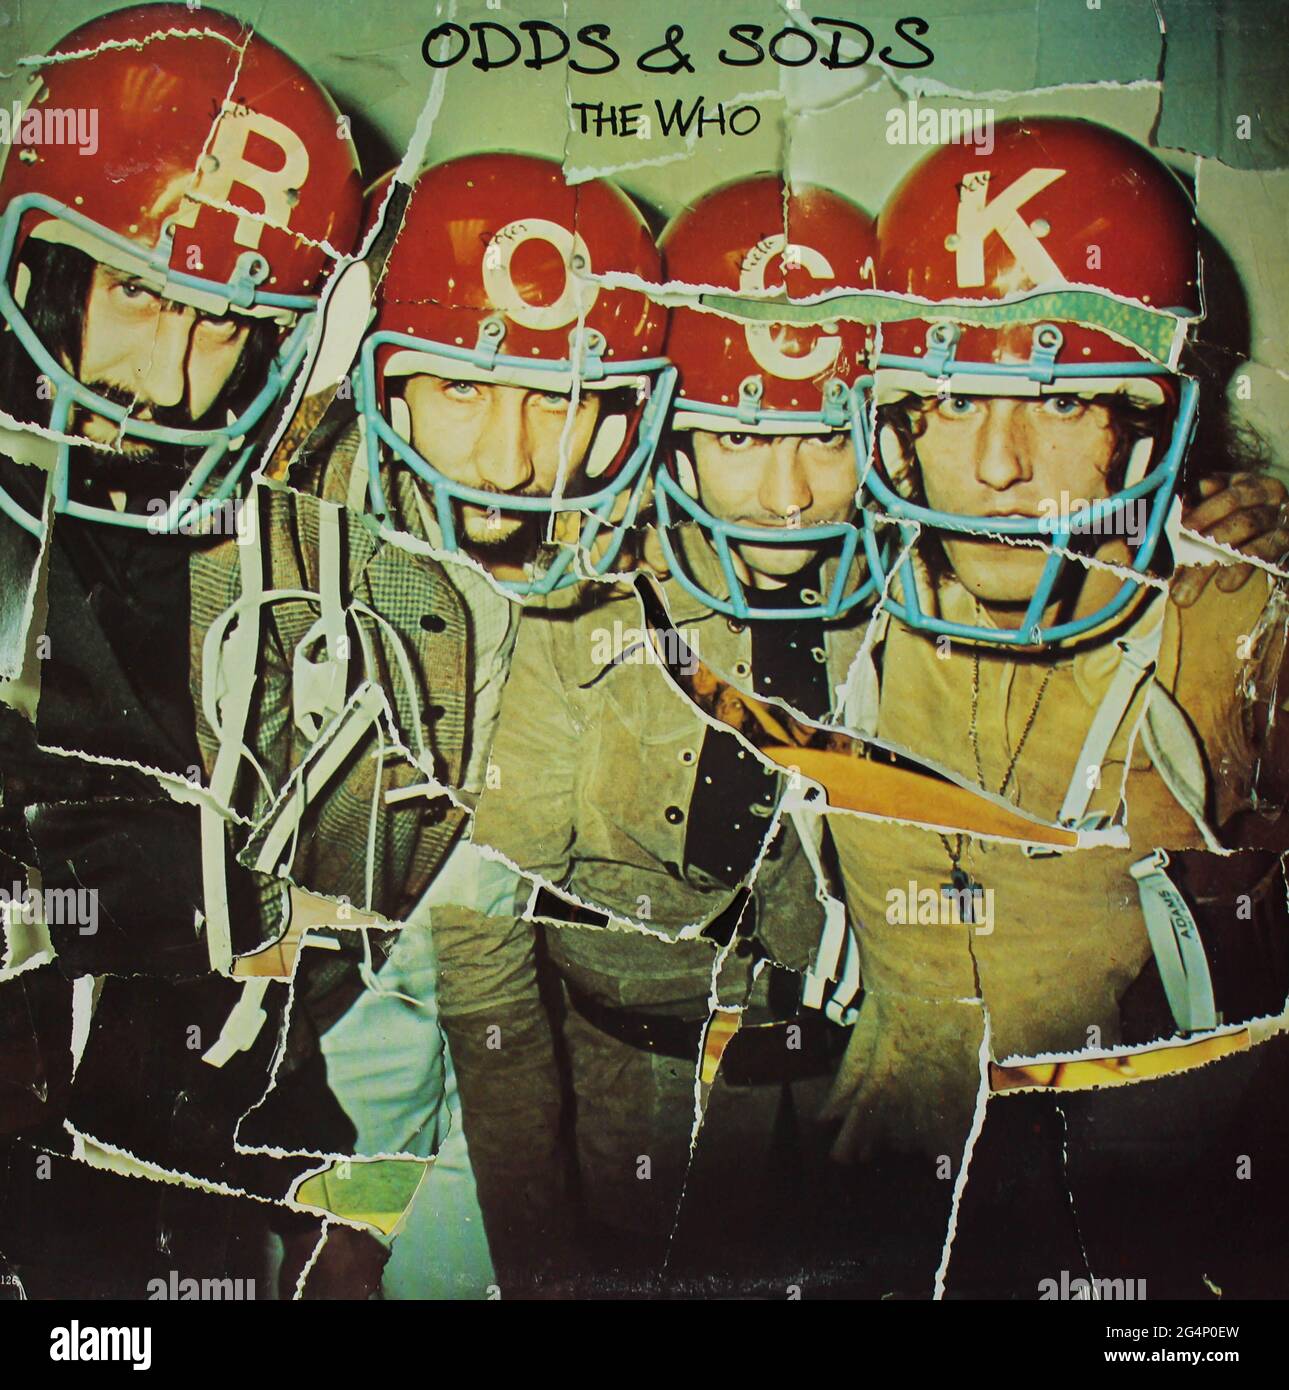 English Rock and hard rock band, The Who music album on vinyl record LP disc. Titled: Odds & Sods album cover Stock Photo